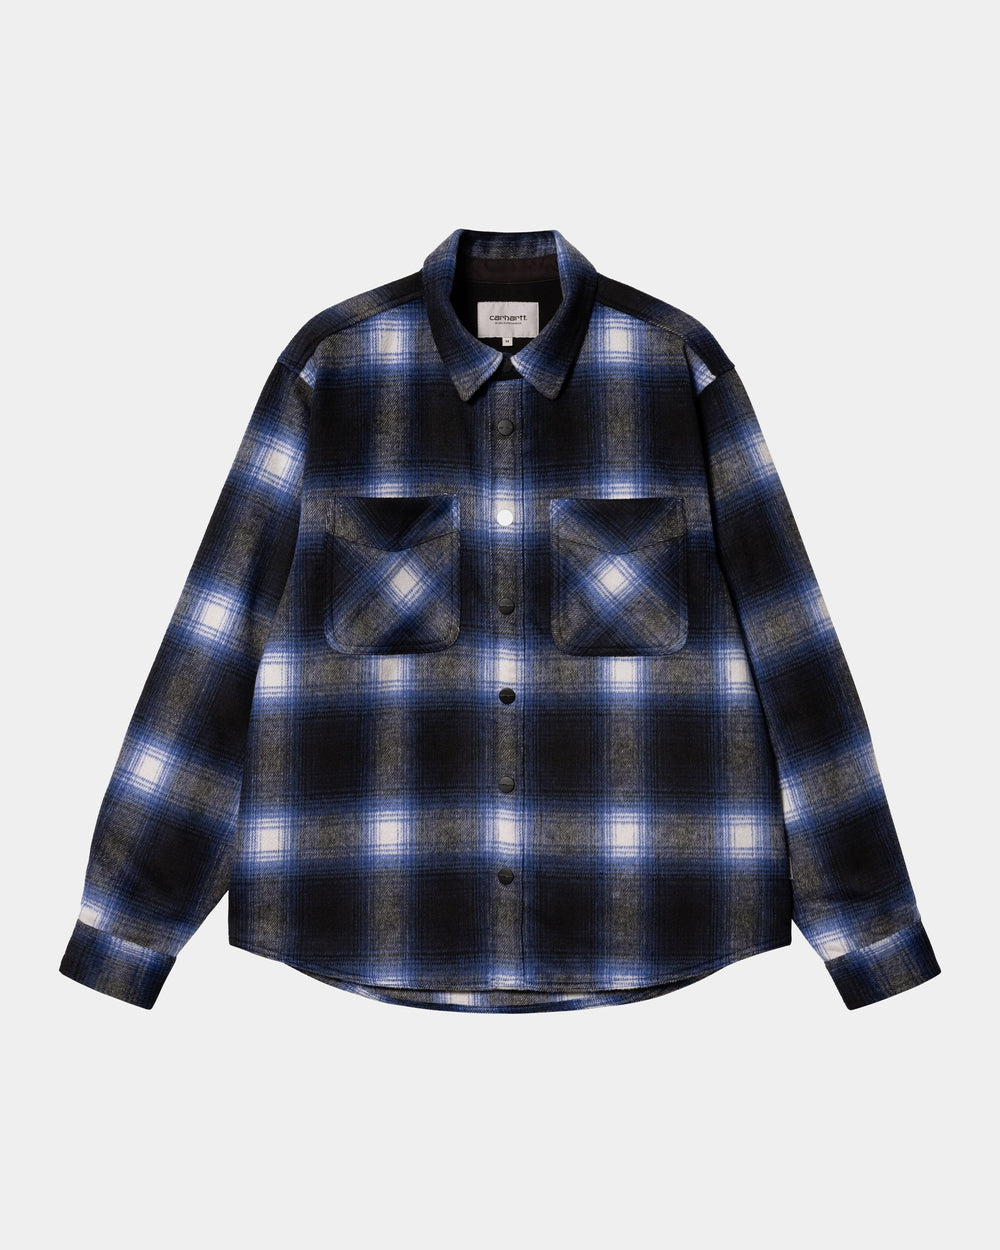 Carhartt WIP - CAHARTT WIP MOREAU CHECK SHIRT JACKET IN LIBERTY - Rent With Thred